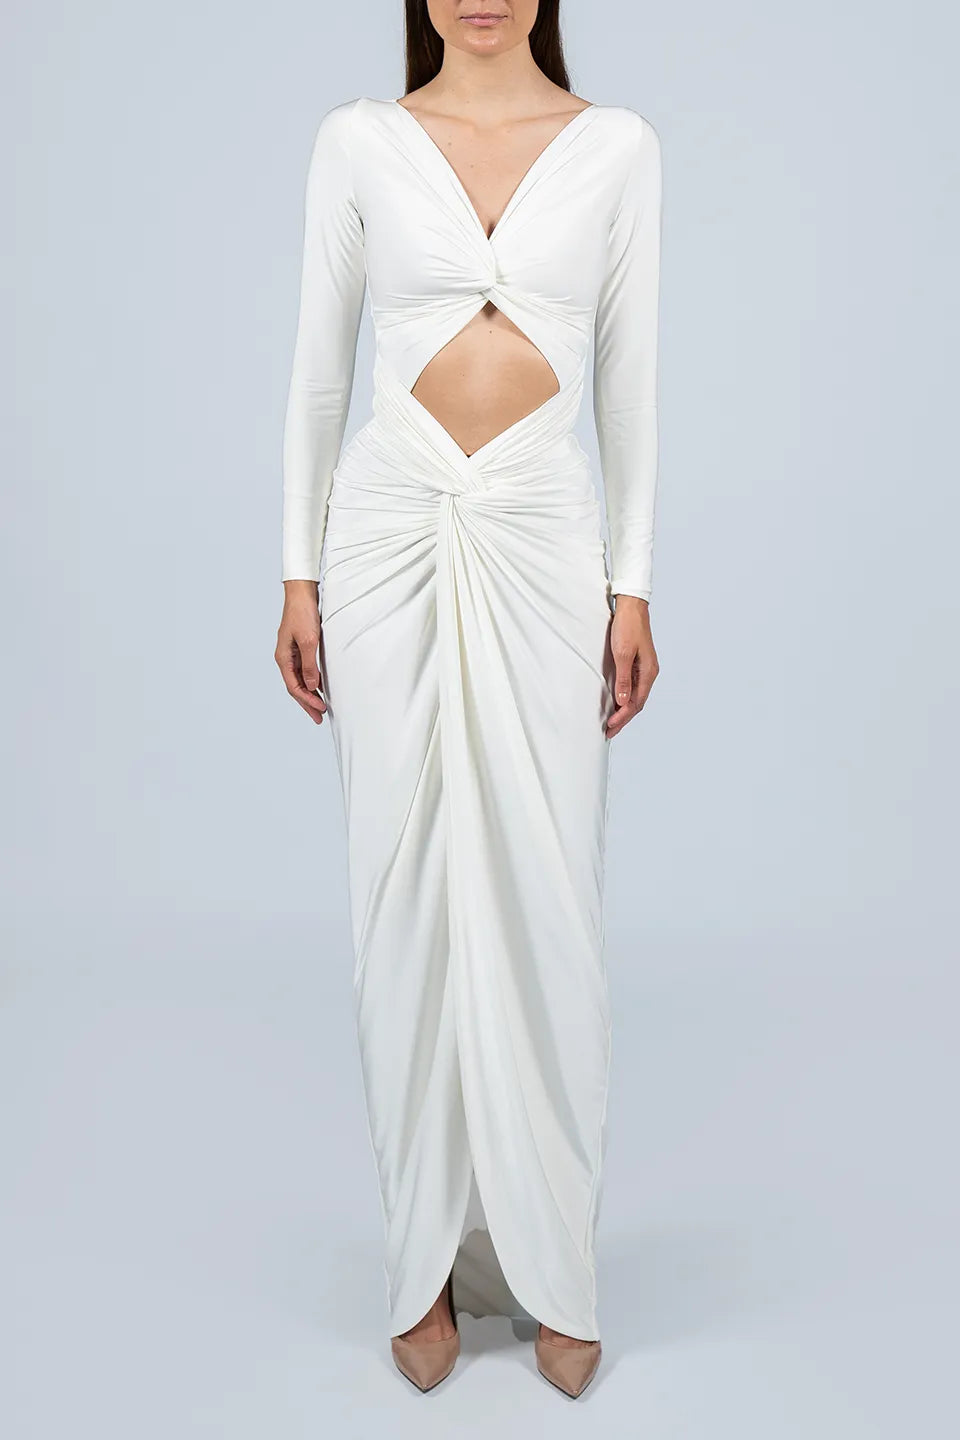 Shop online trendy White Maxi dresses from Hamel Fashion designer. Product gallery 1